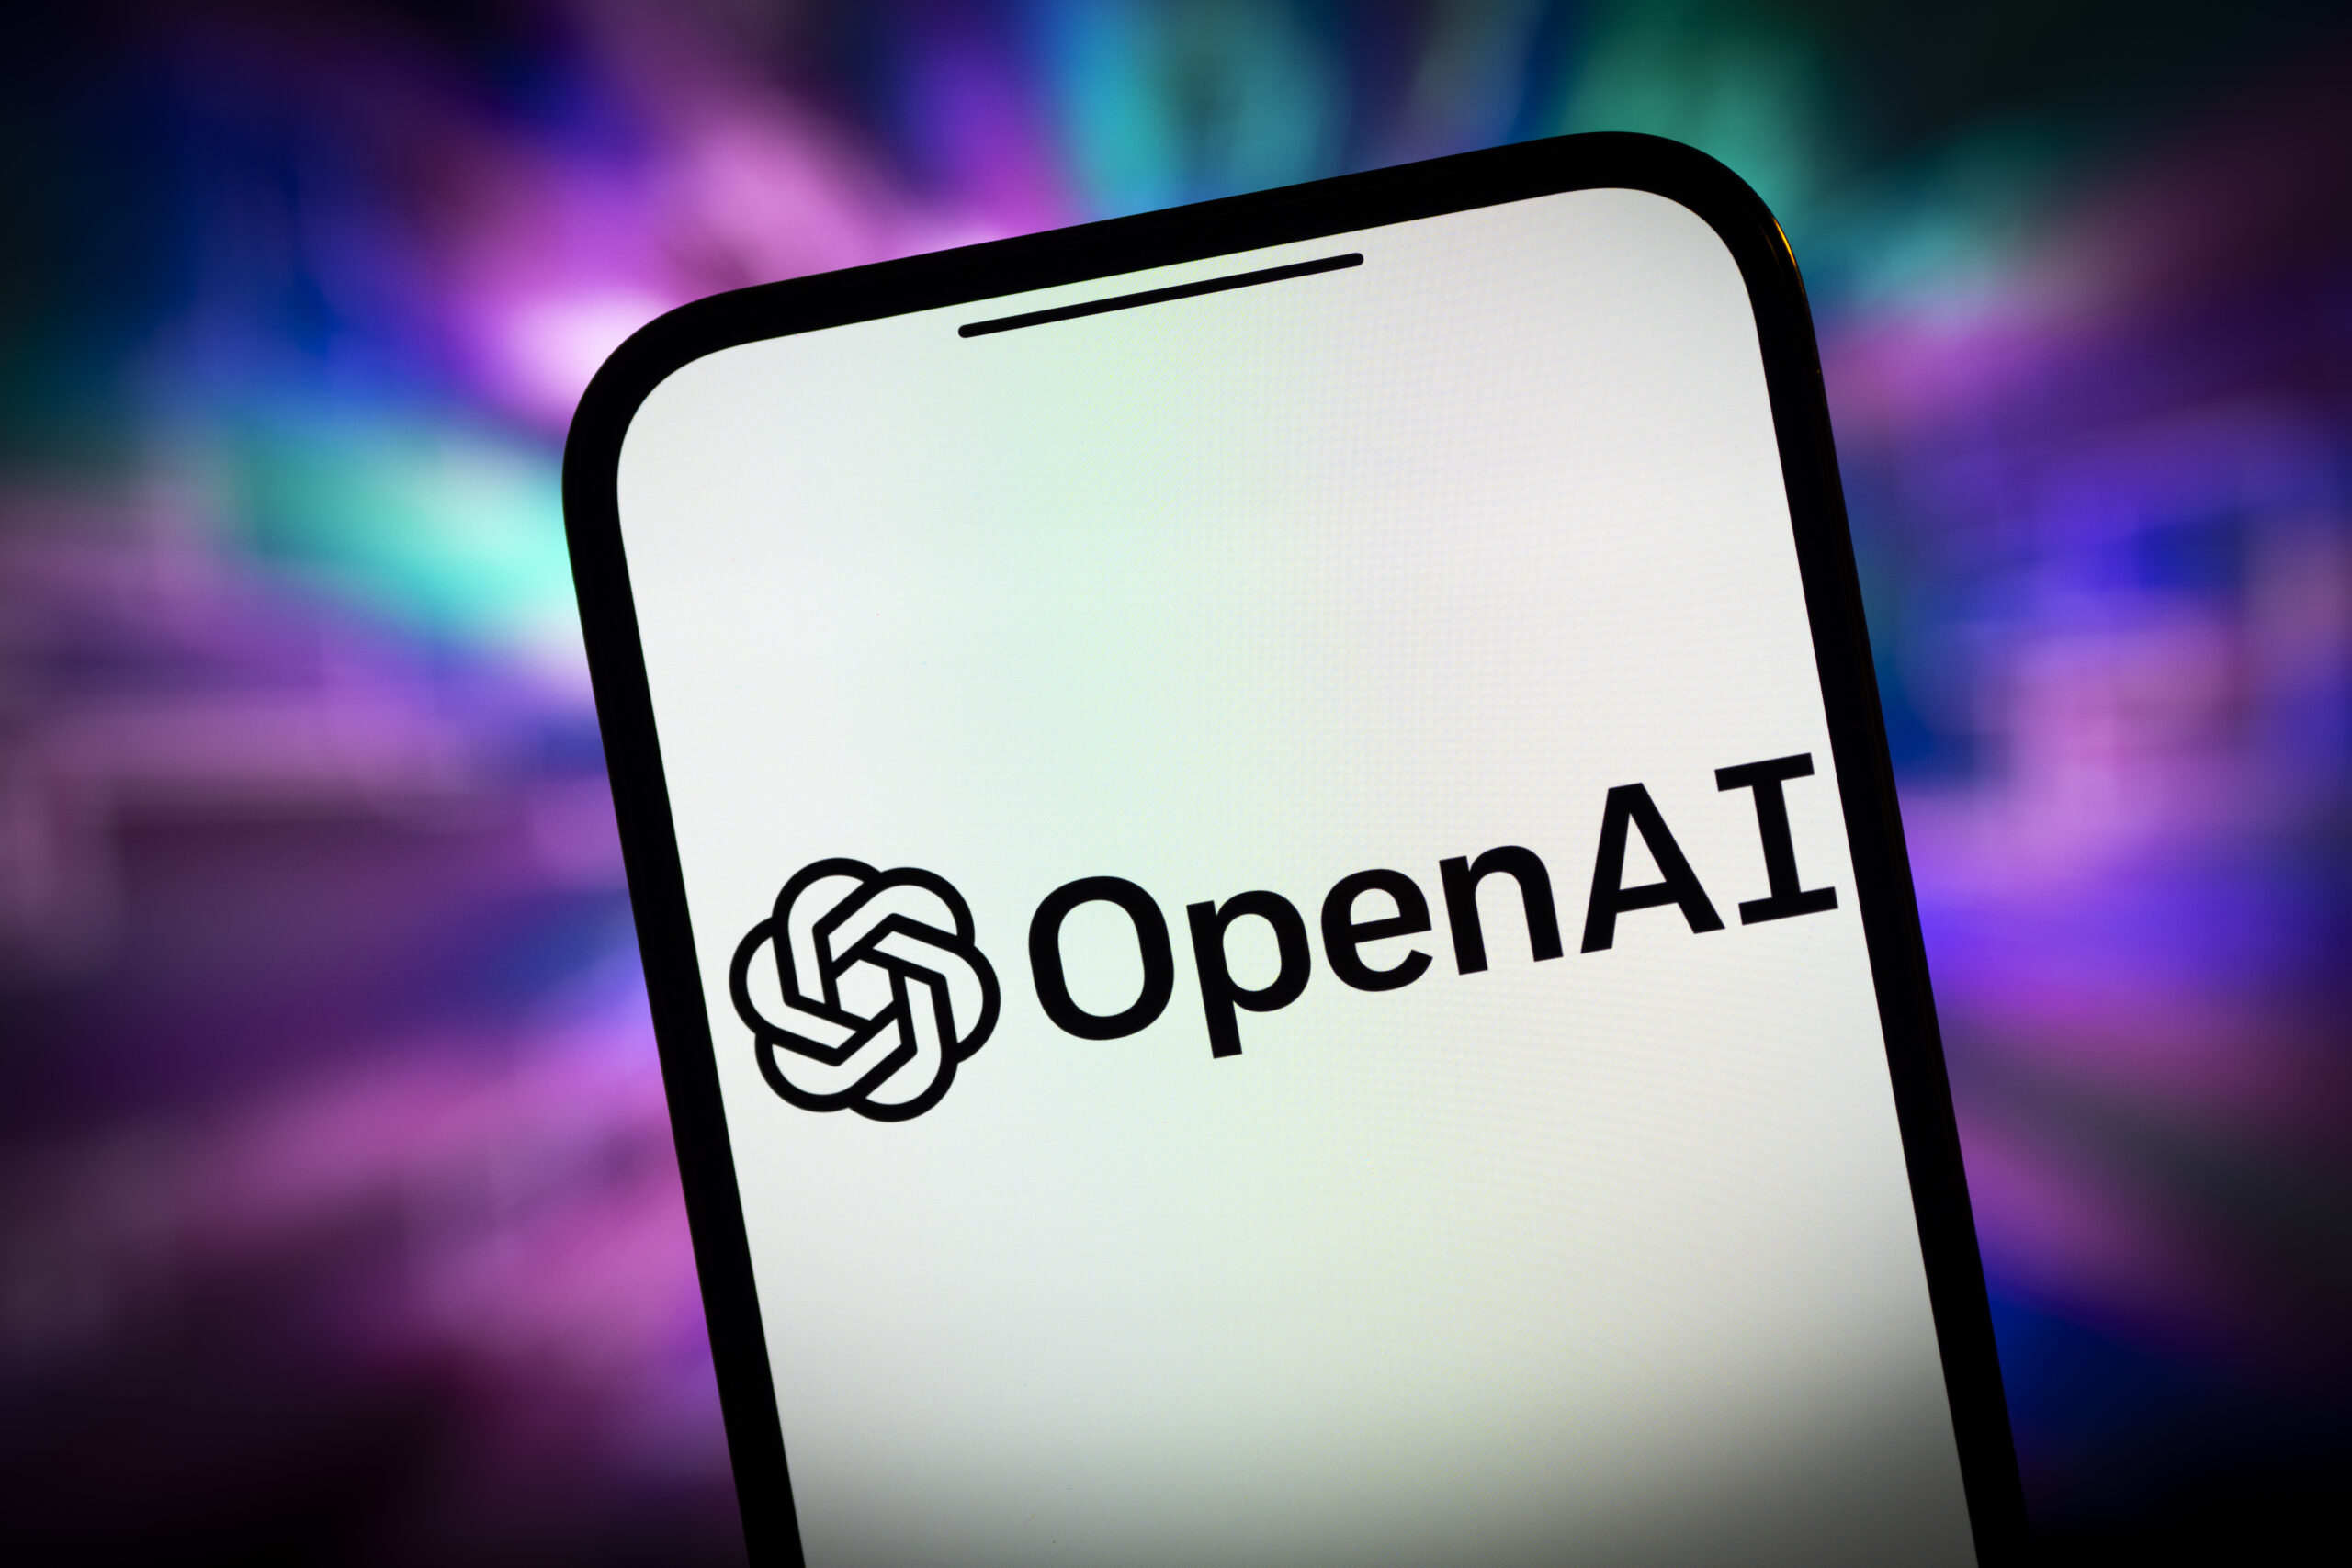 openai logo on iphone in front of colorful background